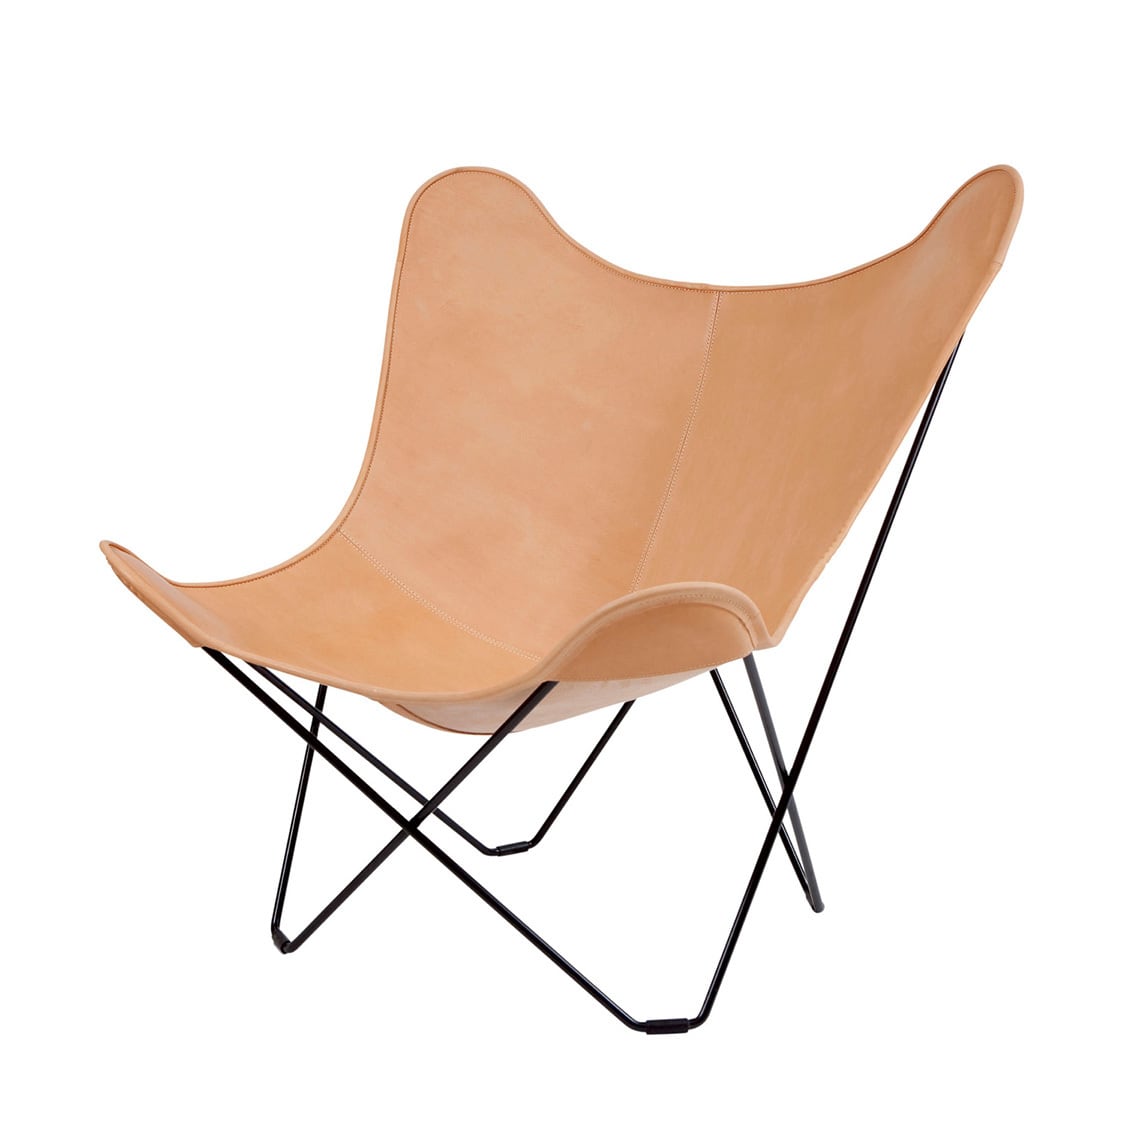 BKF BUTTERFLY CHAIR MARIPOSA NATURAL